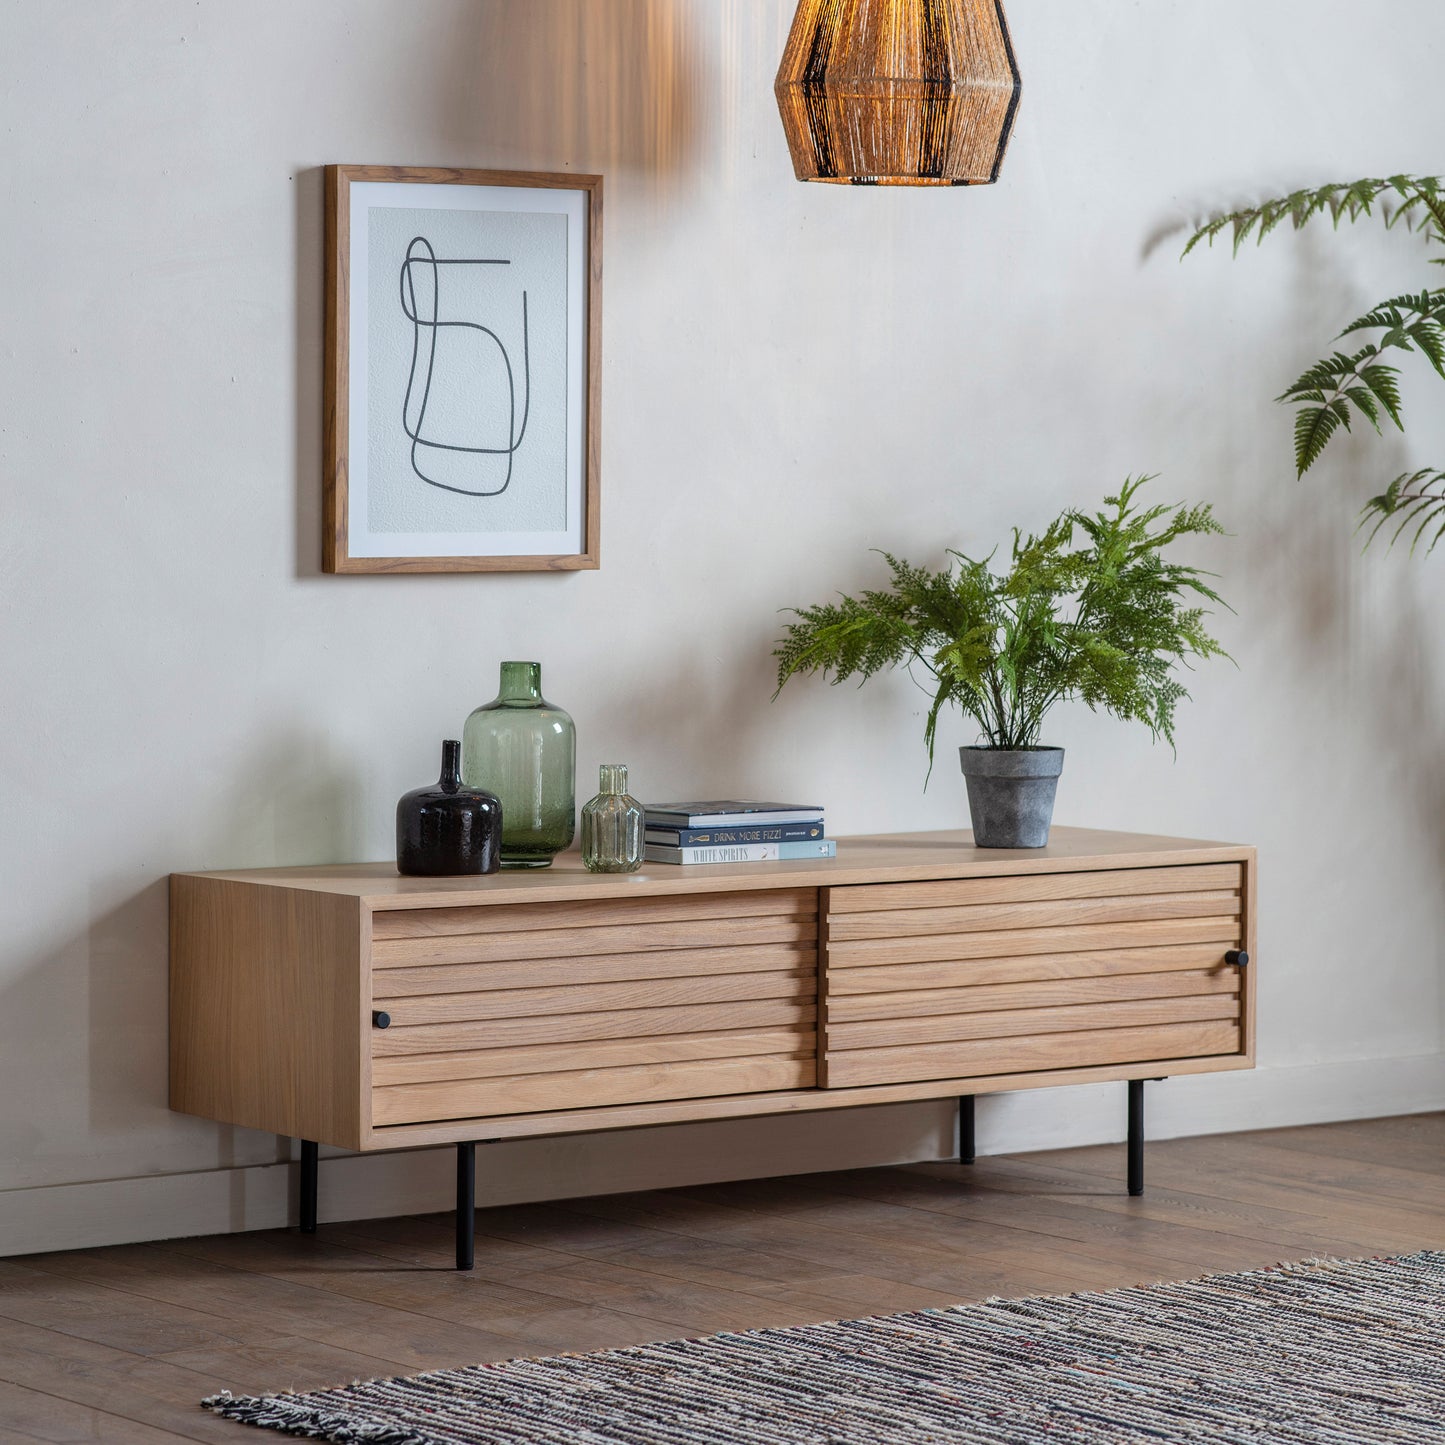 An interior decor featuring a Tortington Media Unit 1400x420x440mm as home furniture in a living room, alongside a potted plant.